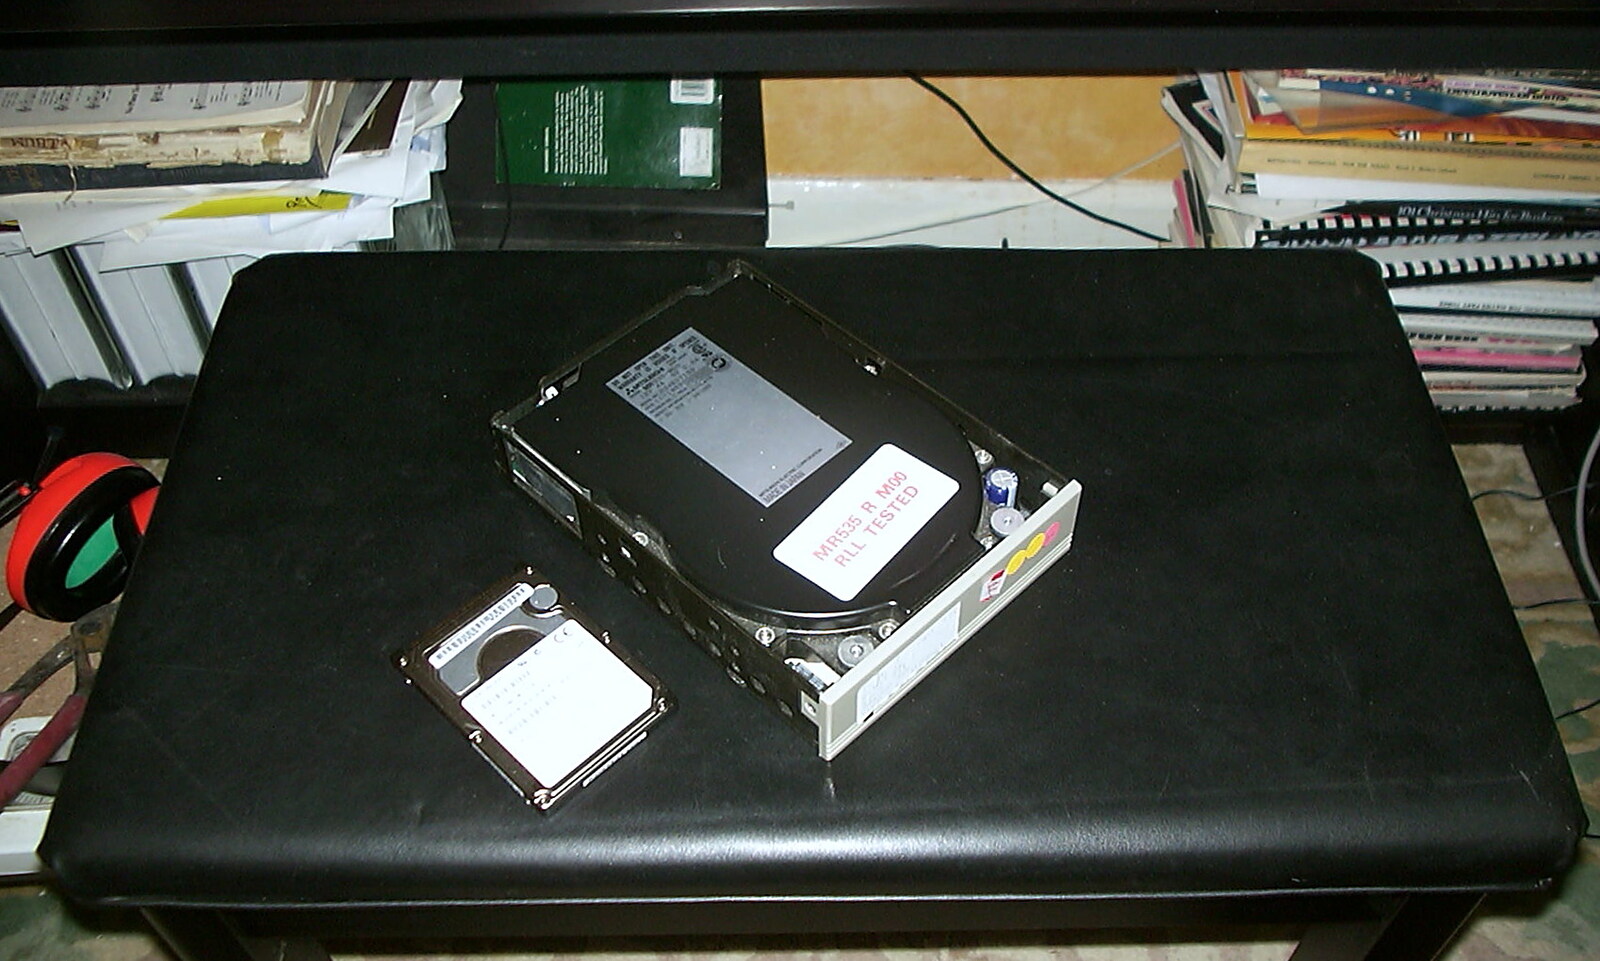 An old RLL hard drive is ready to take apart from A Hard-Drive Clock and Other Projects, Brome, Suffolk - 28th June 2002